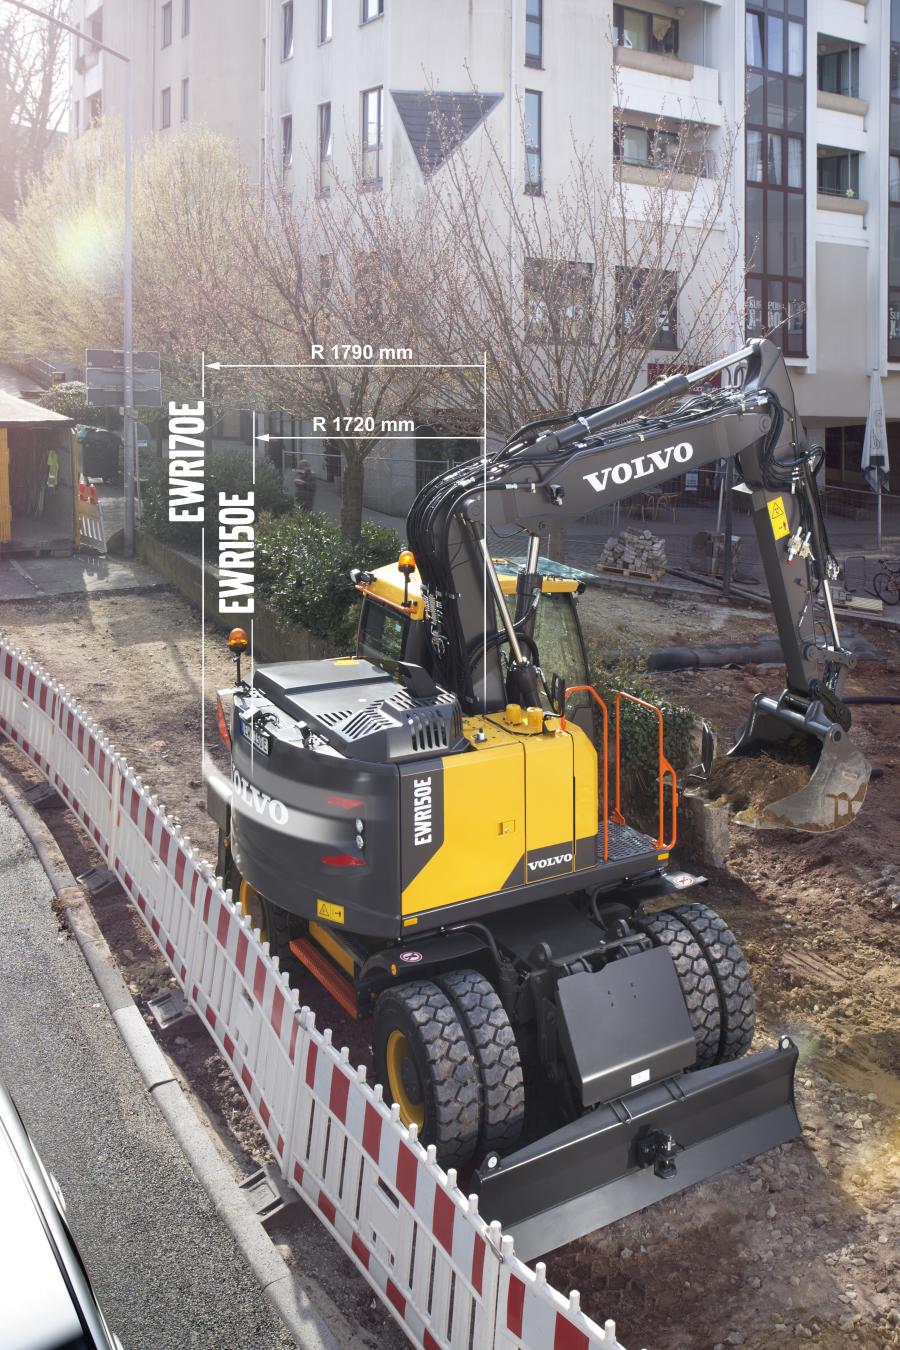 Wheeled excavator use in Europe has outpaced their use in the United States for decades. But like past trends, U.S. consumers are seeing the European results and choosing to adopt these tools for work in America.